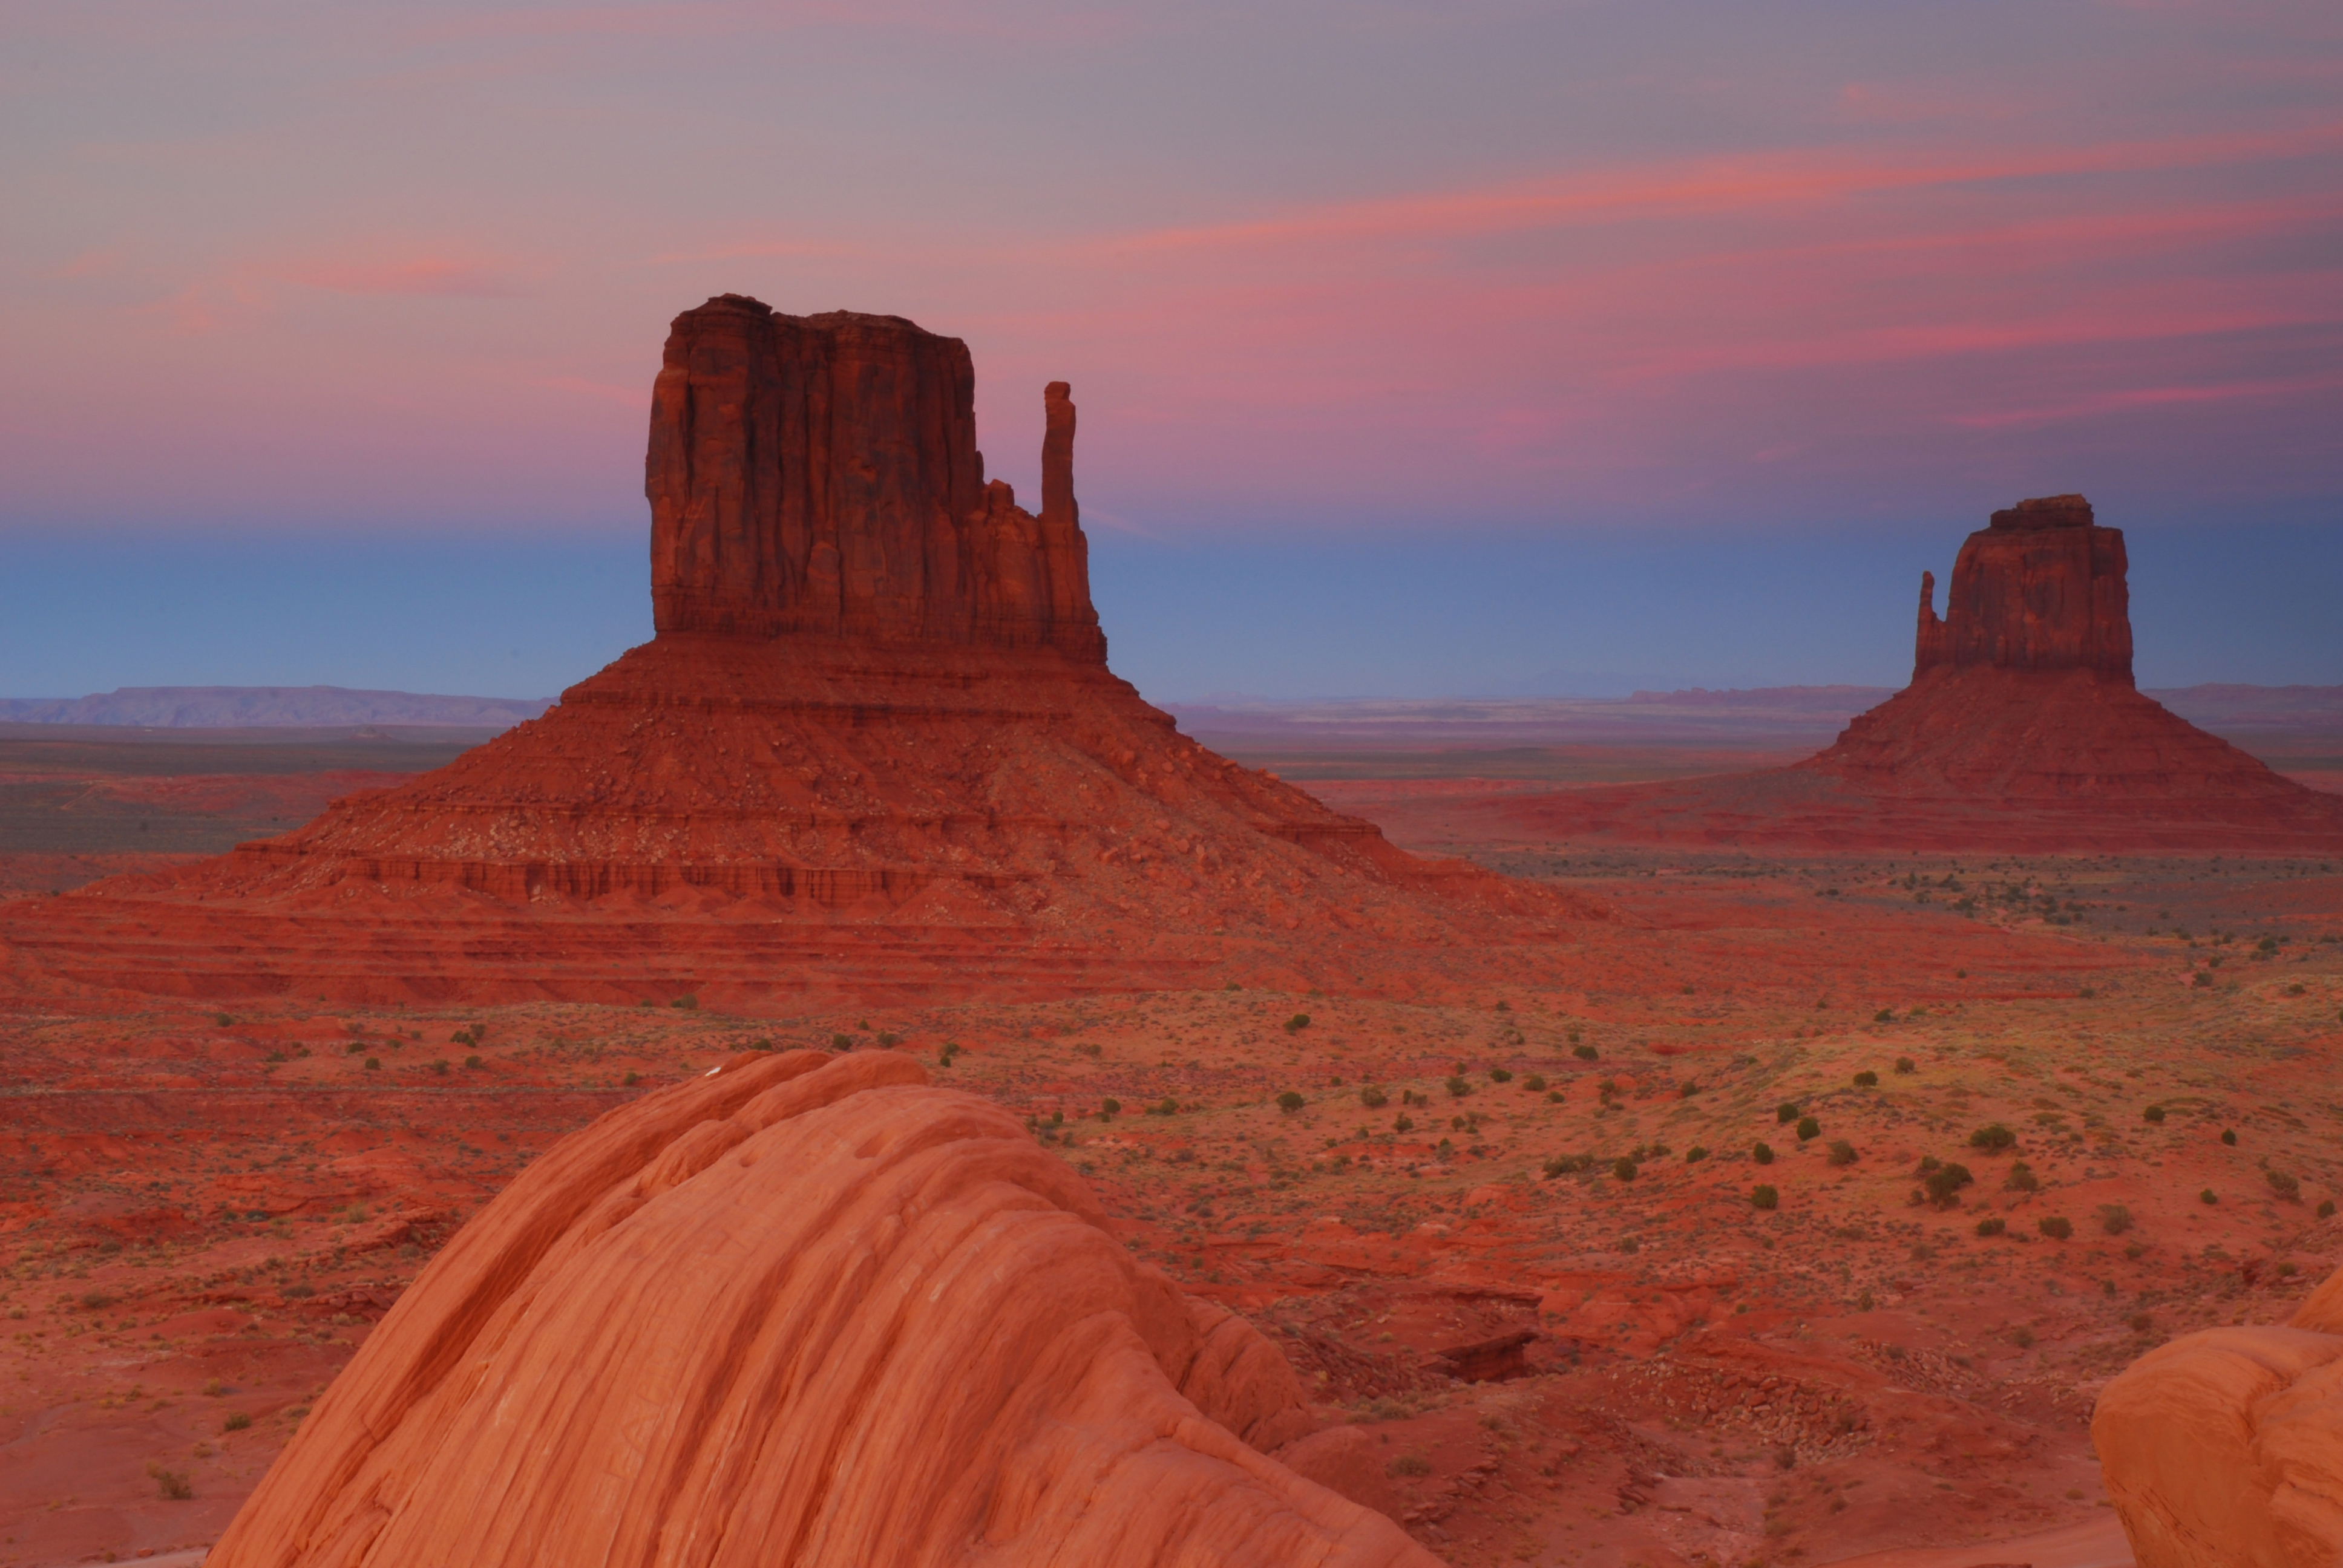 West (left) and East (right) Mitten Buttes in post-sunset light  -  Monument Valley Navajo Tribal Park, Arizona  